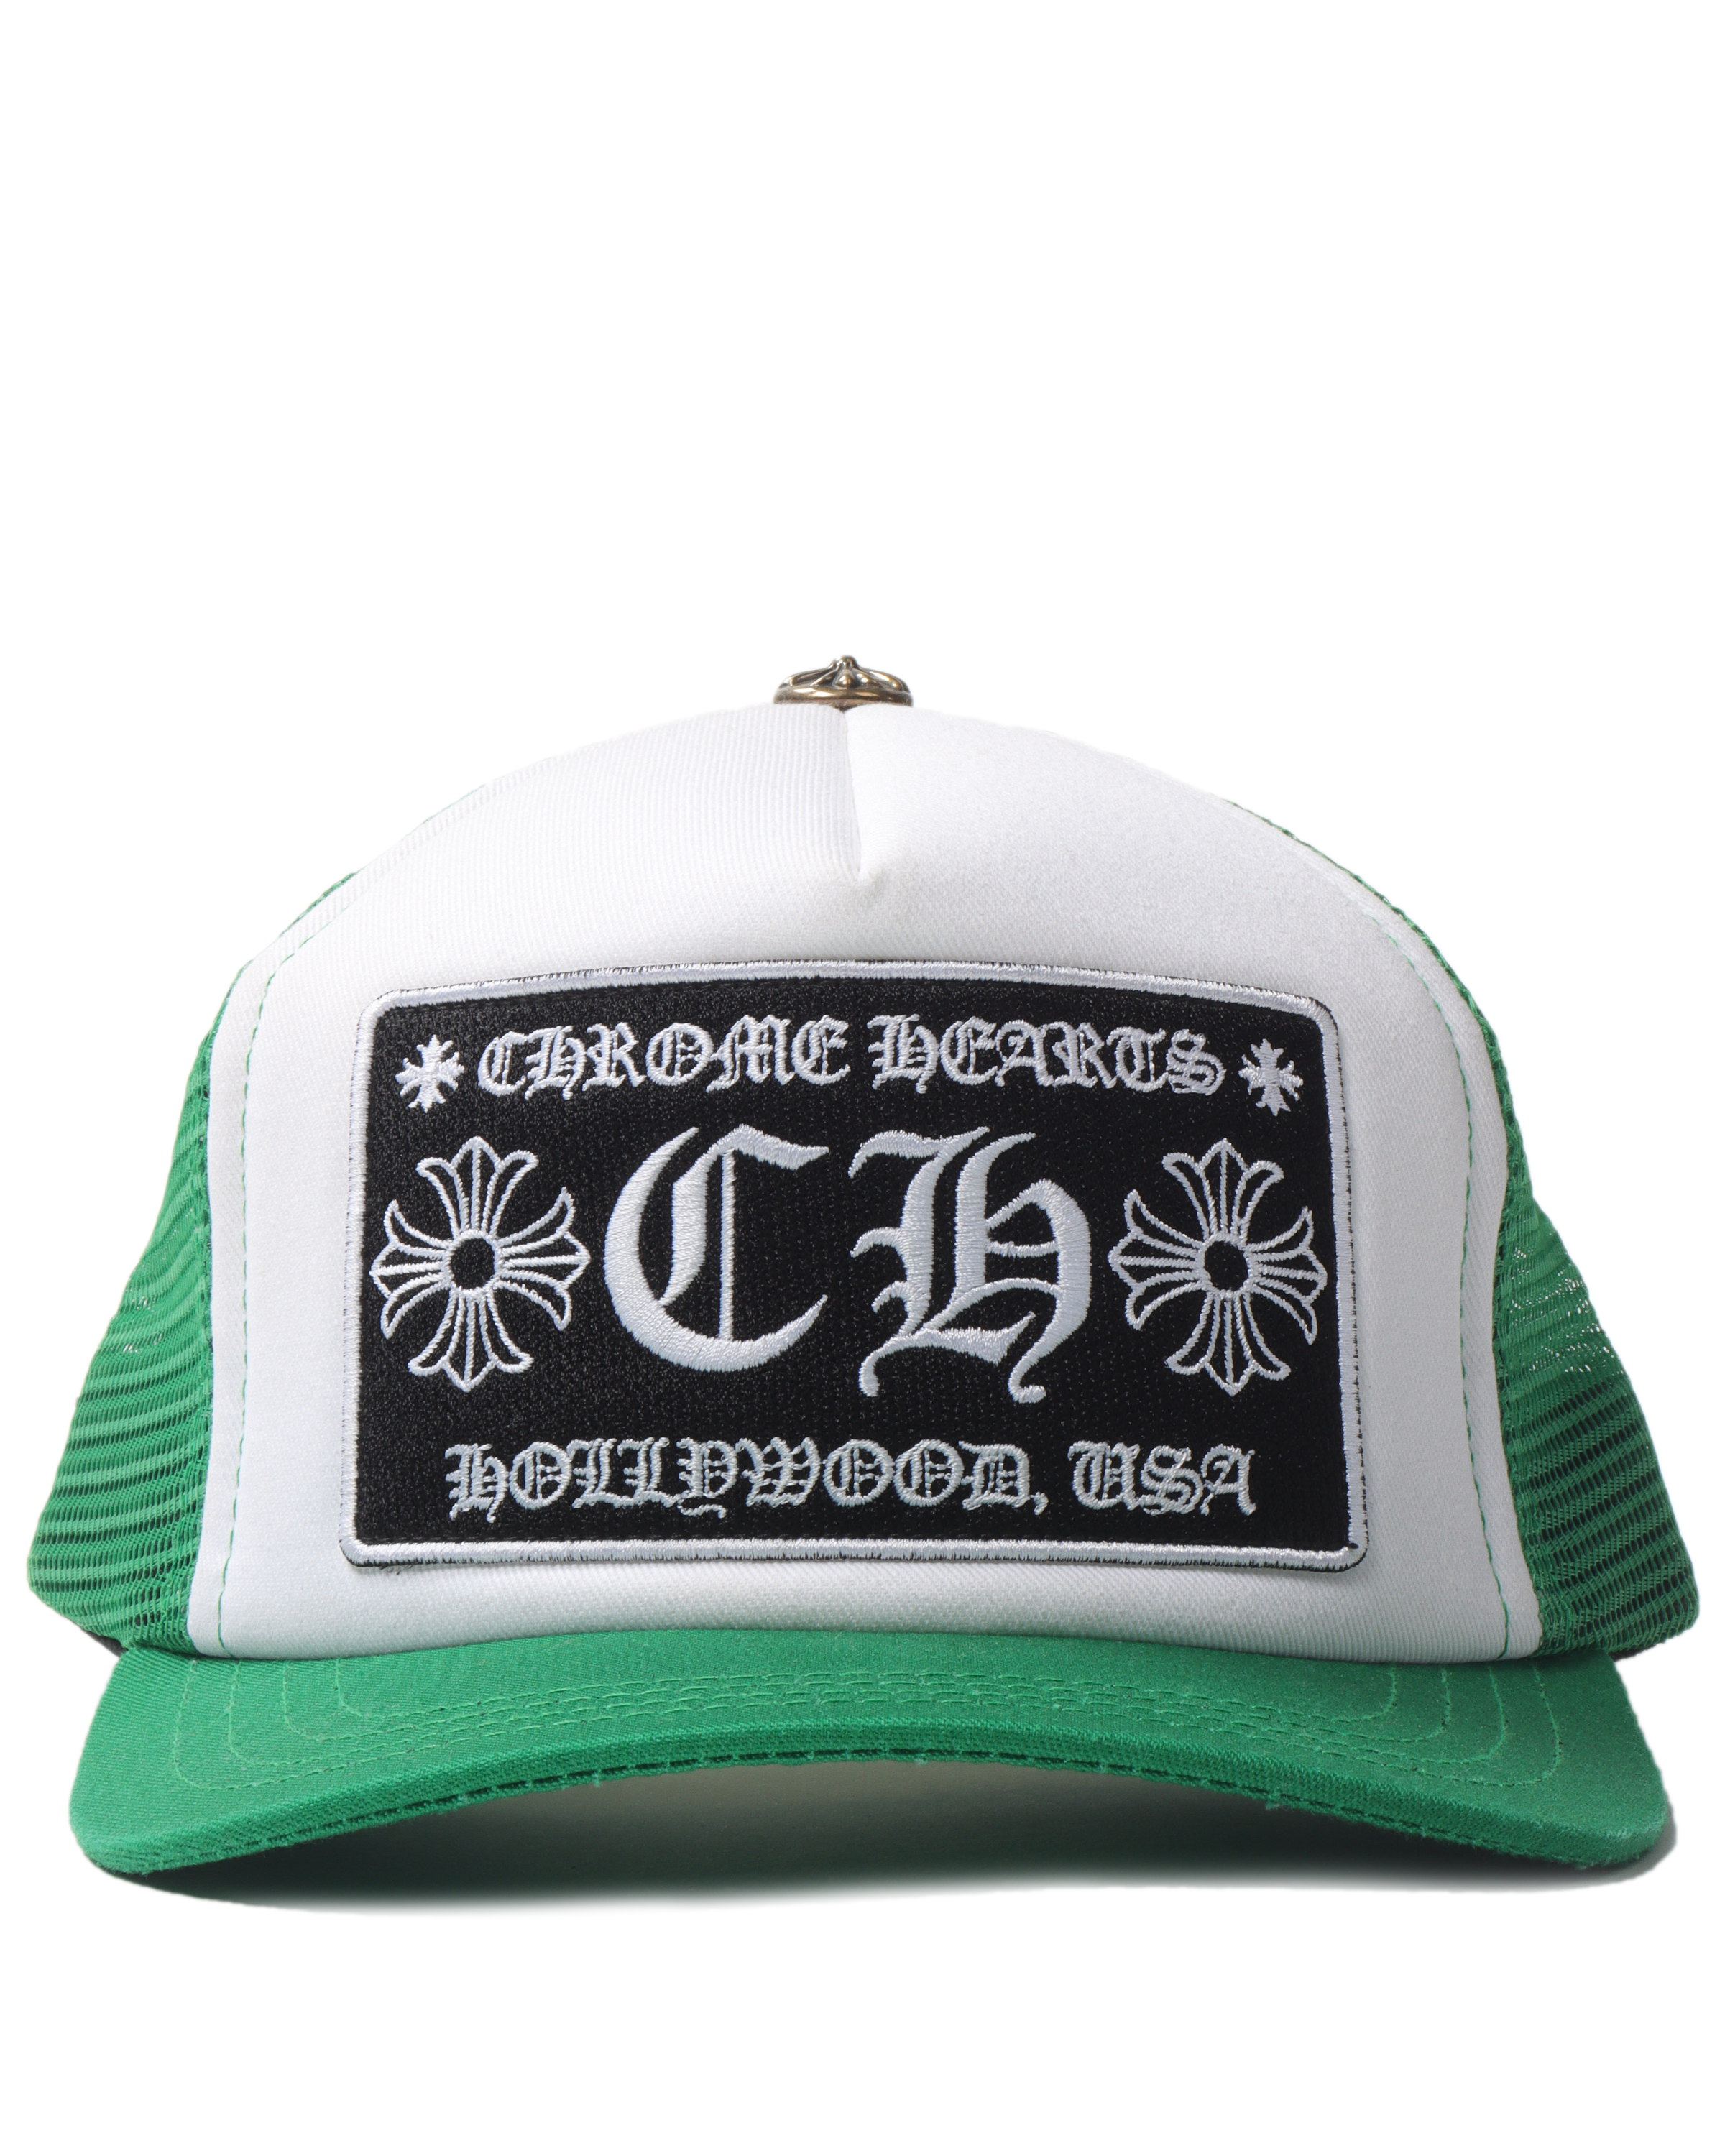 Green and White Hollywood Hat